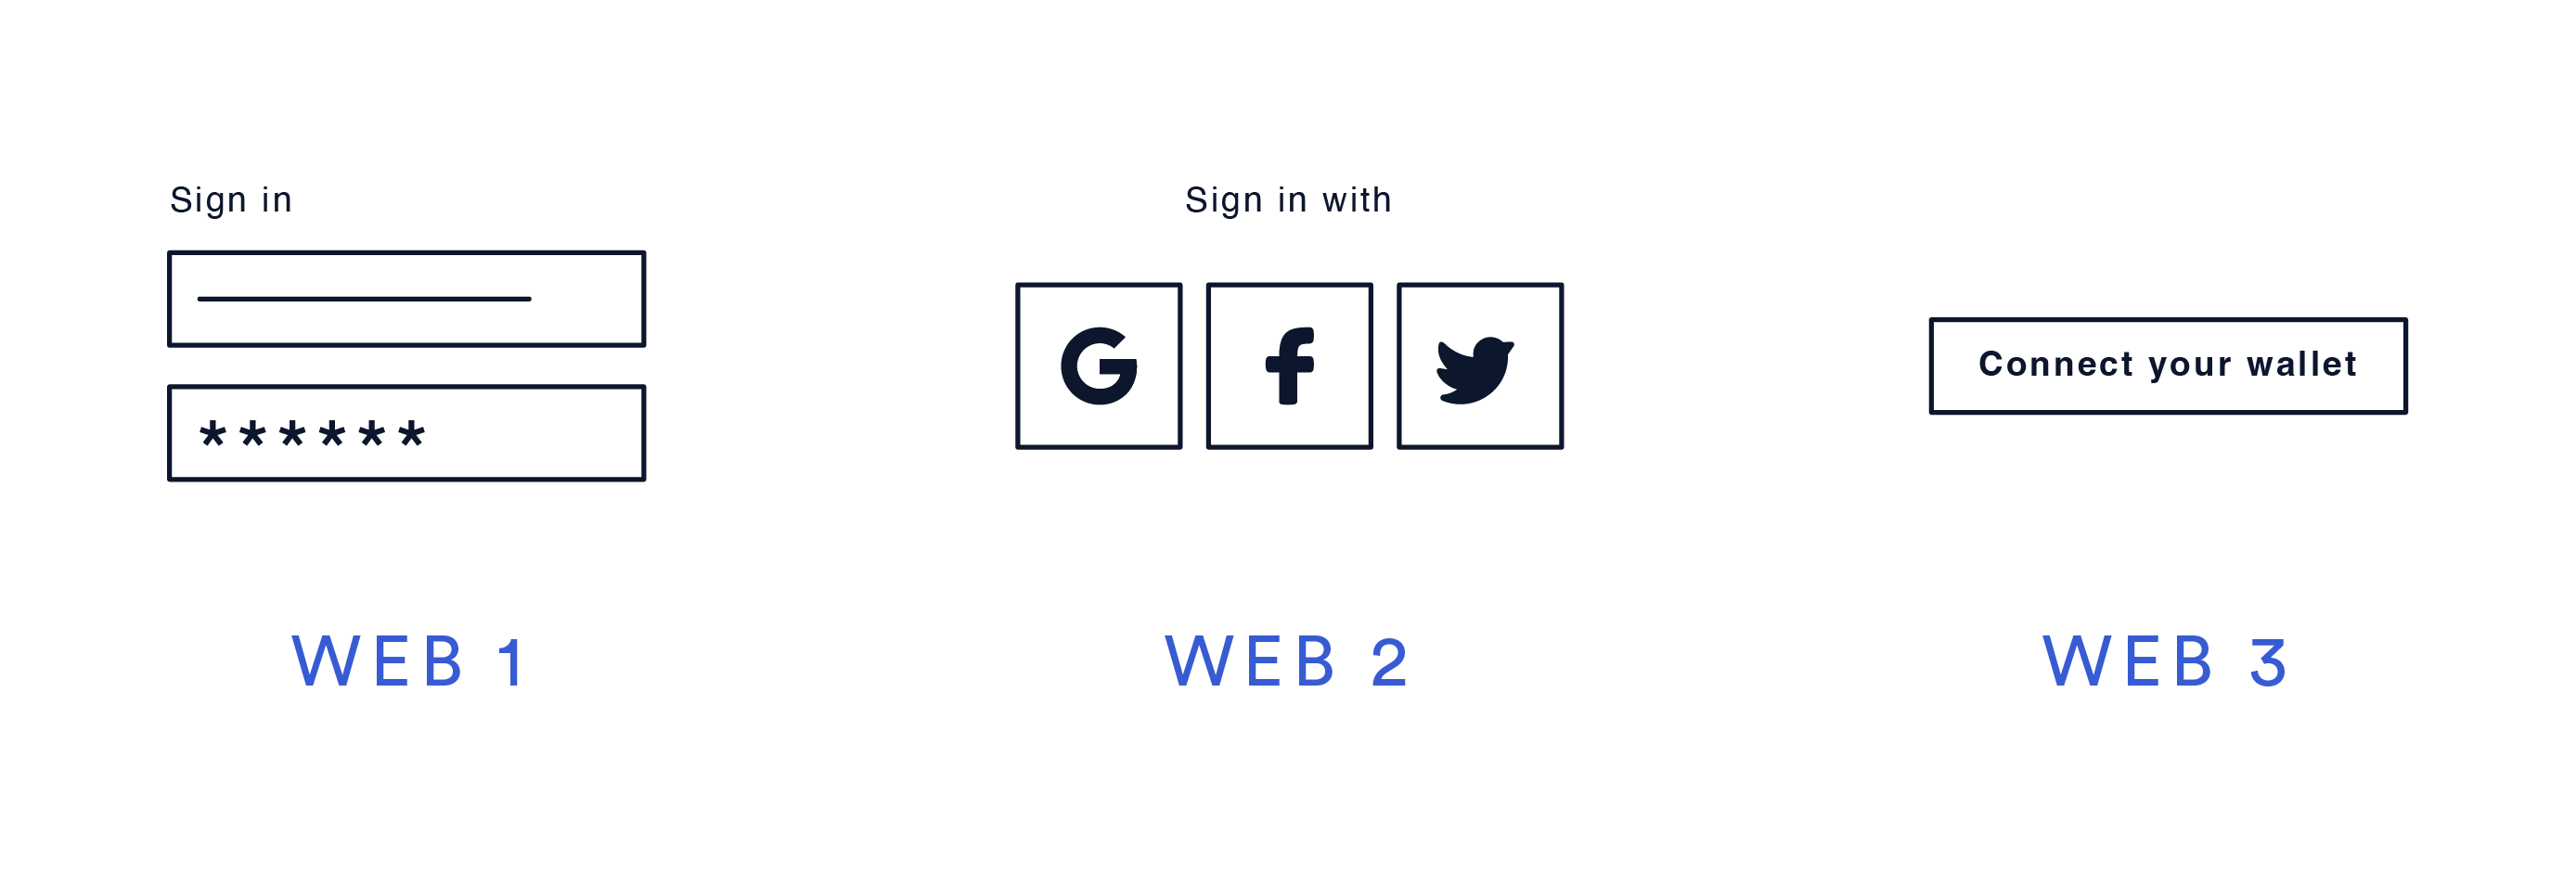 An image showing the evolution of login options from Web 1 to Web 3. 